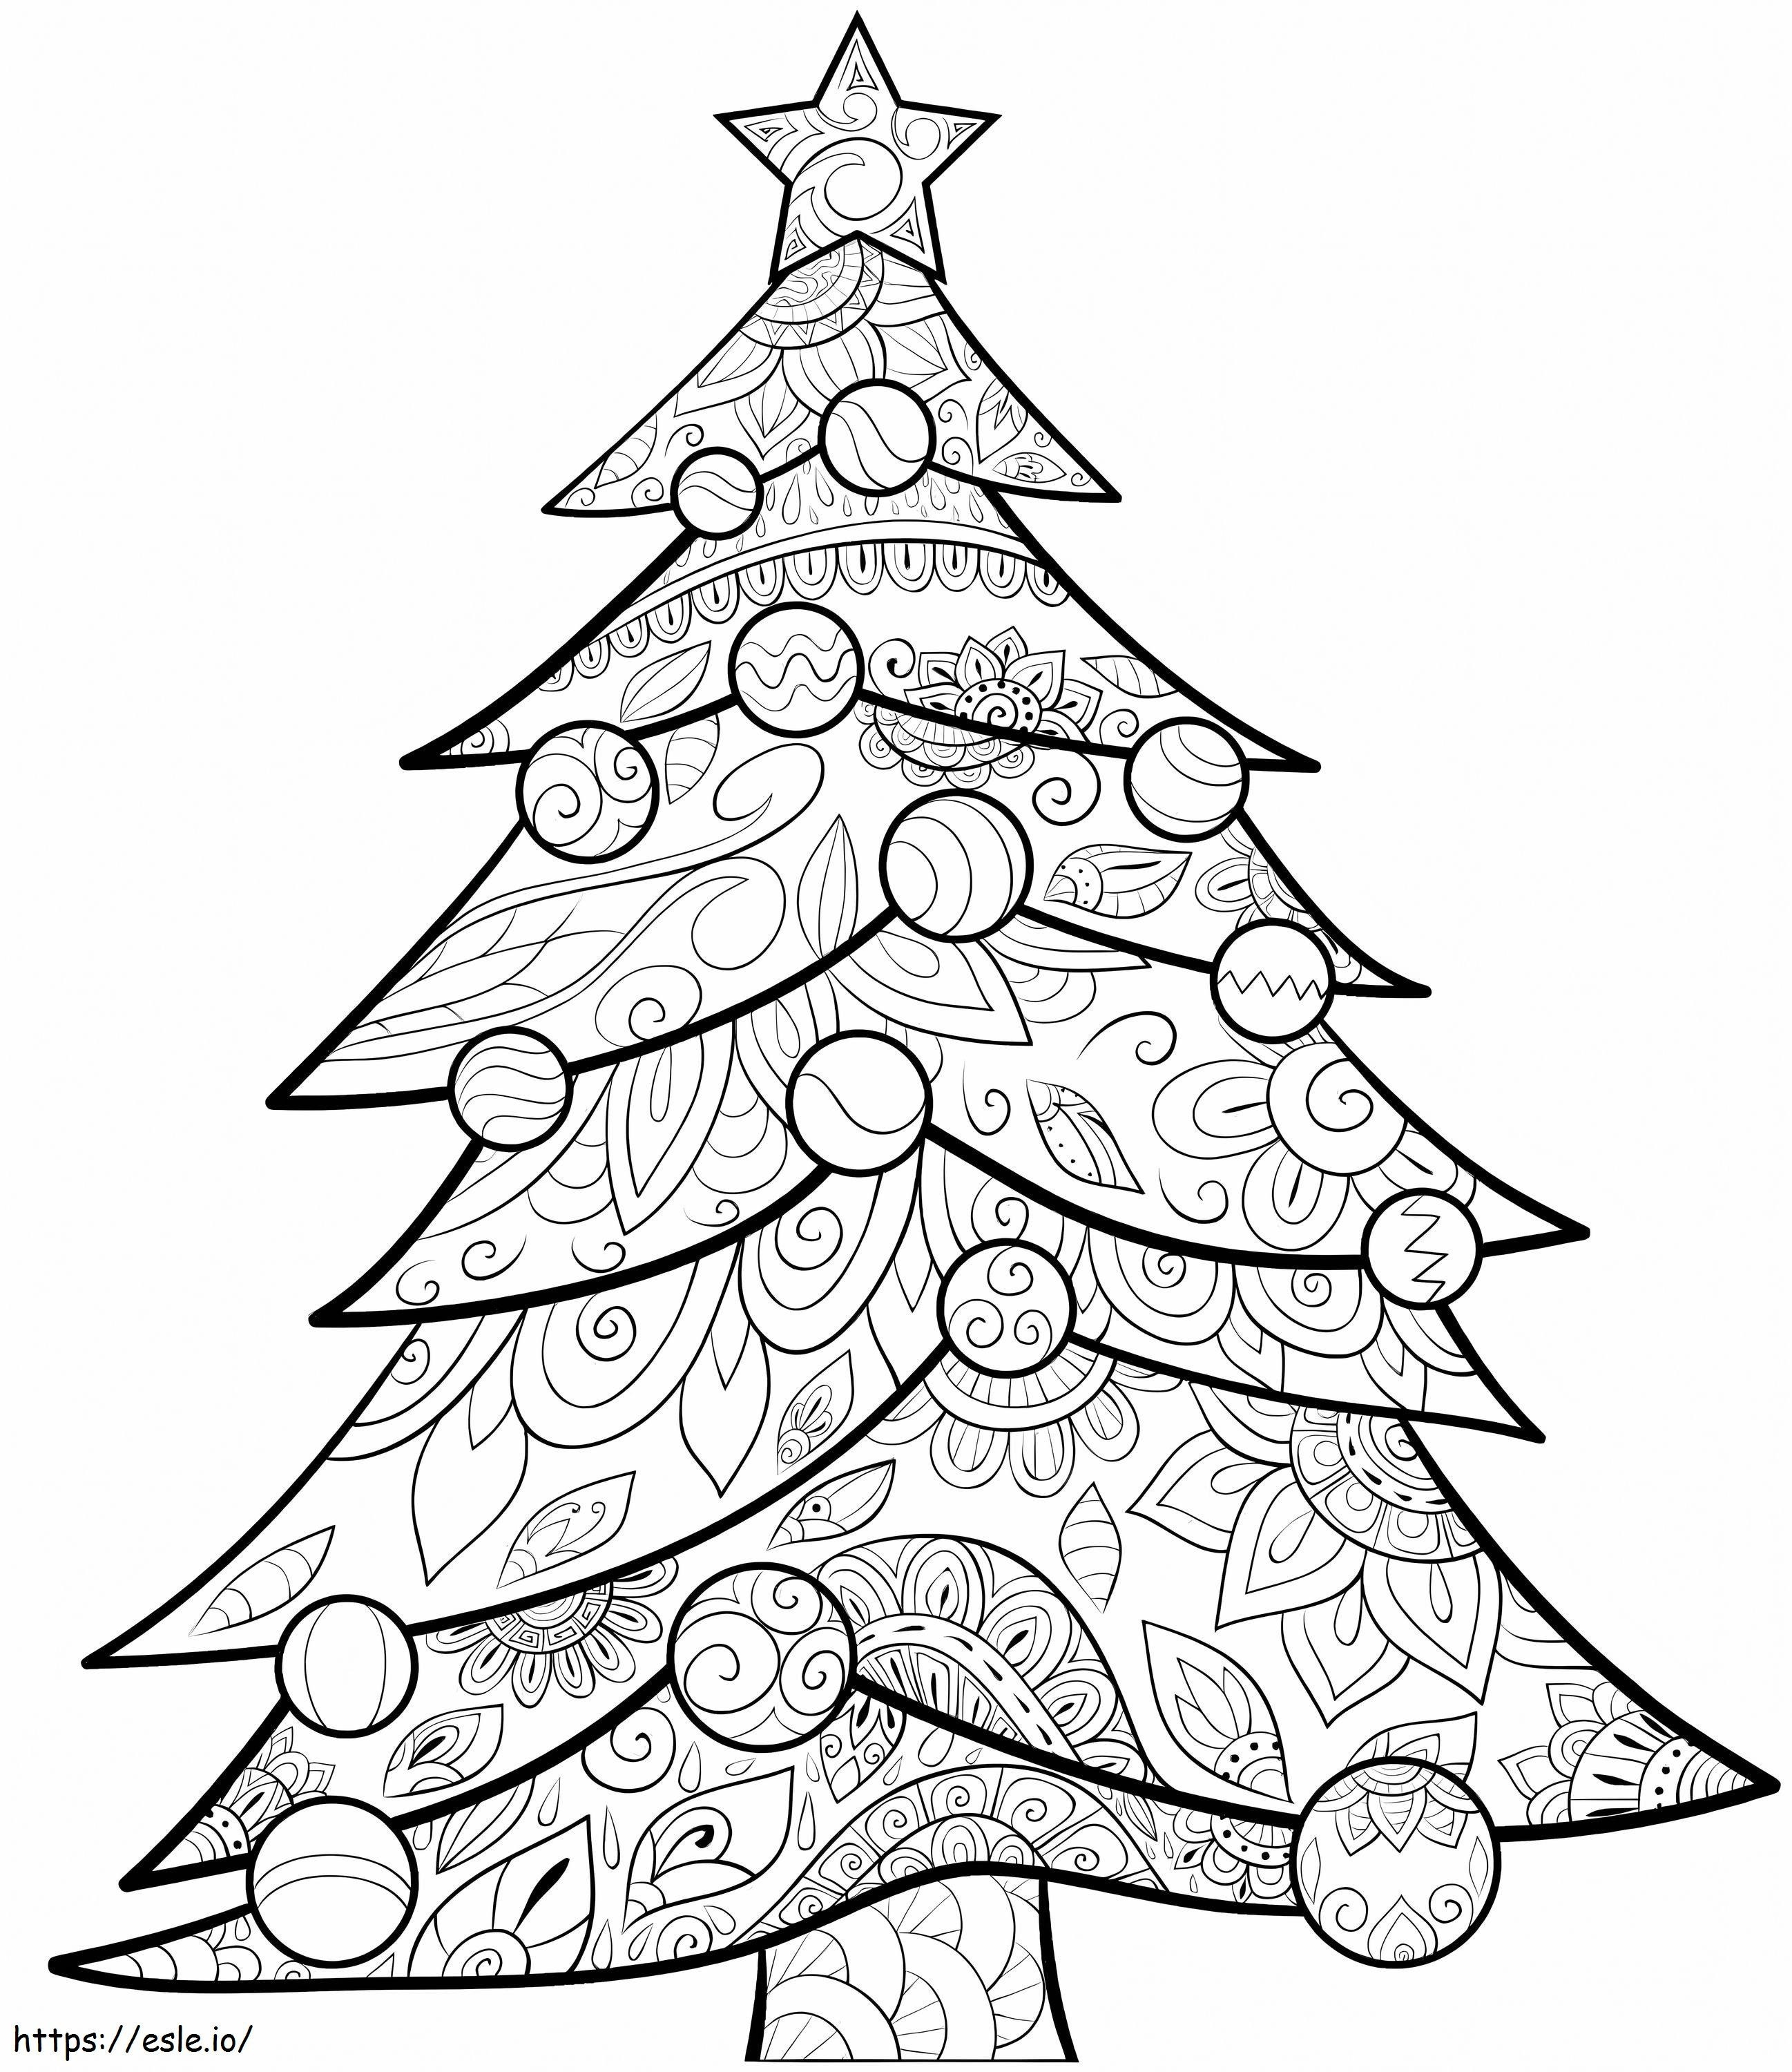 Christmas Tree Is For Adults coloring page